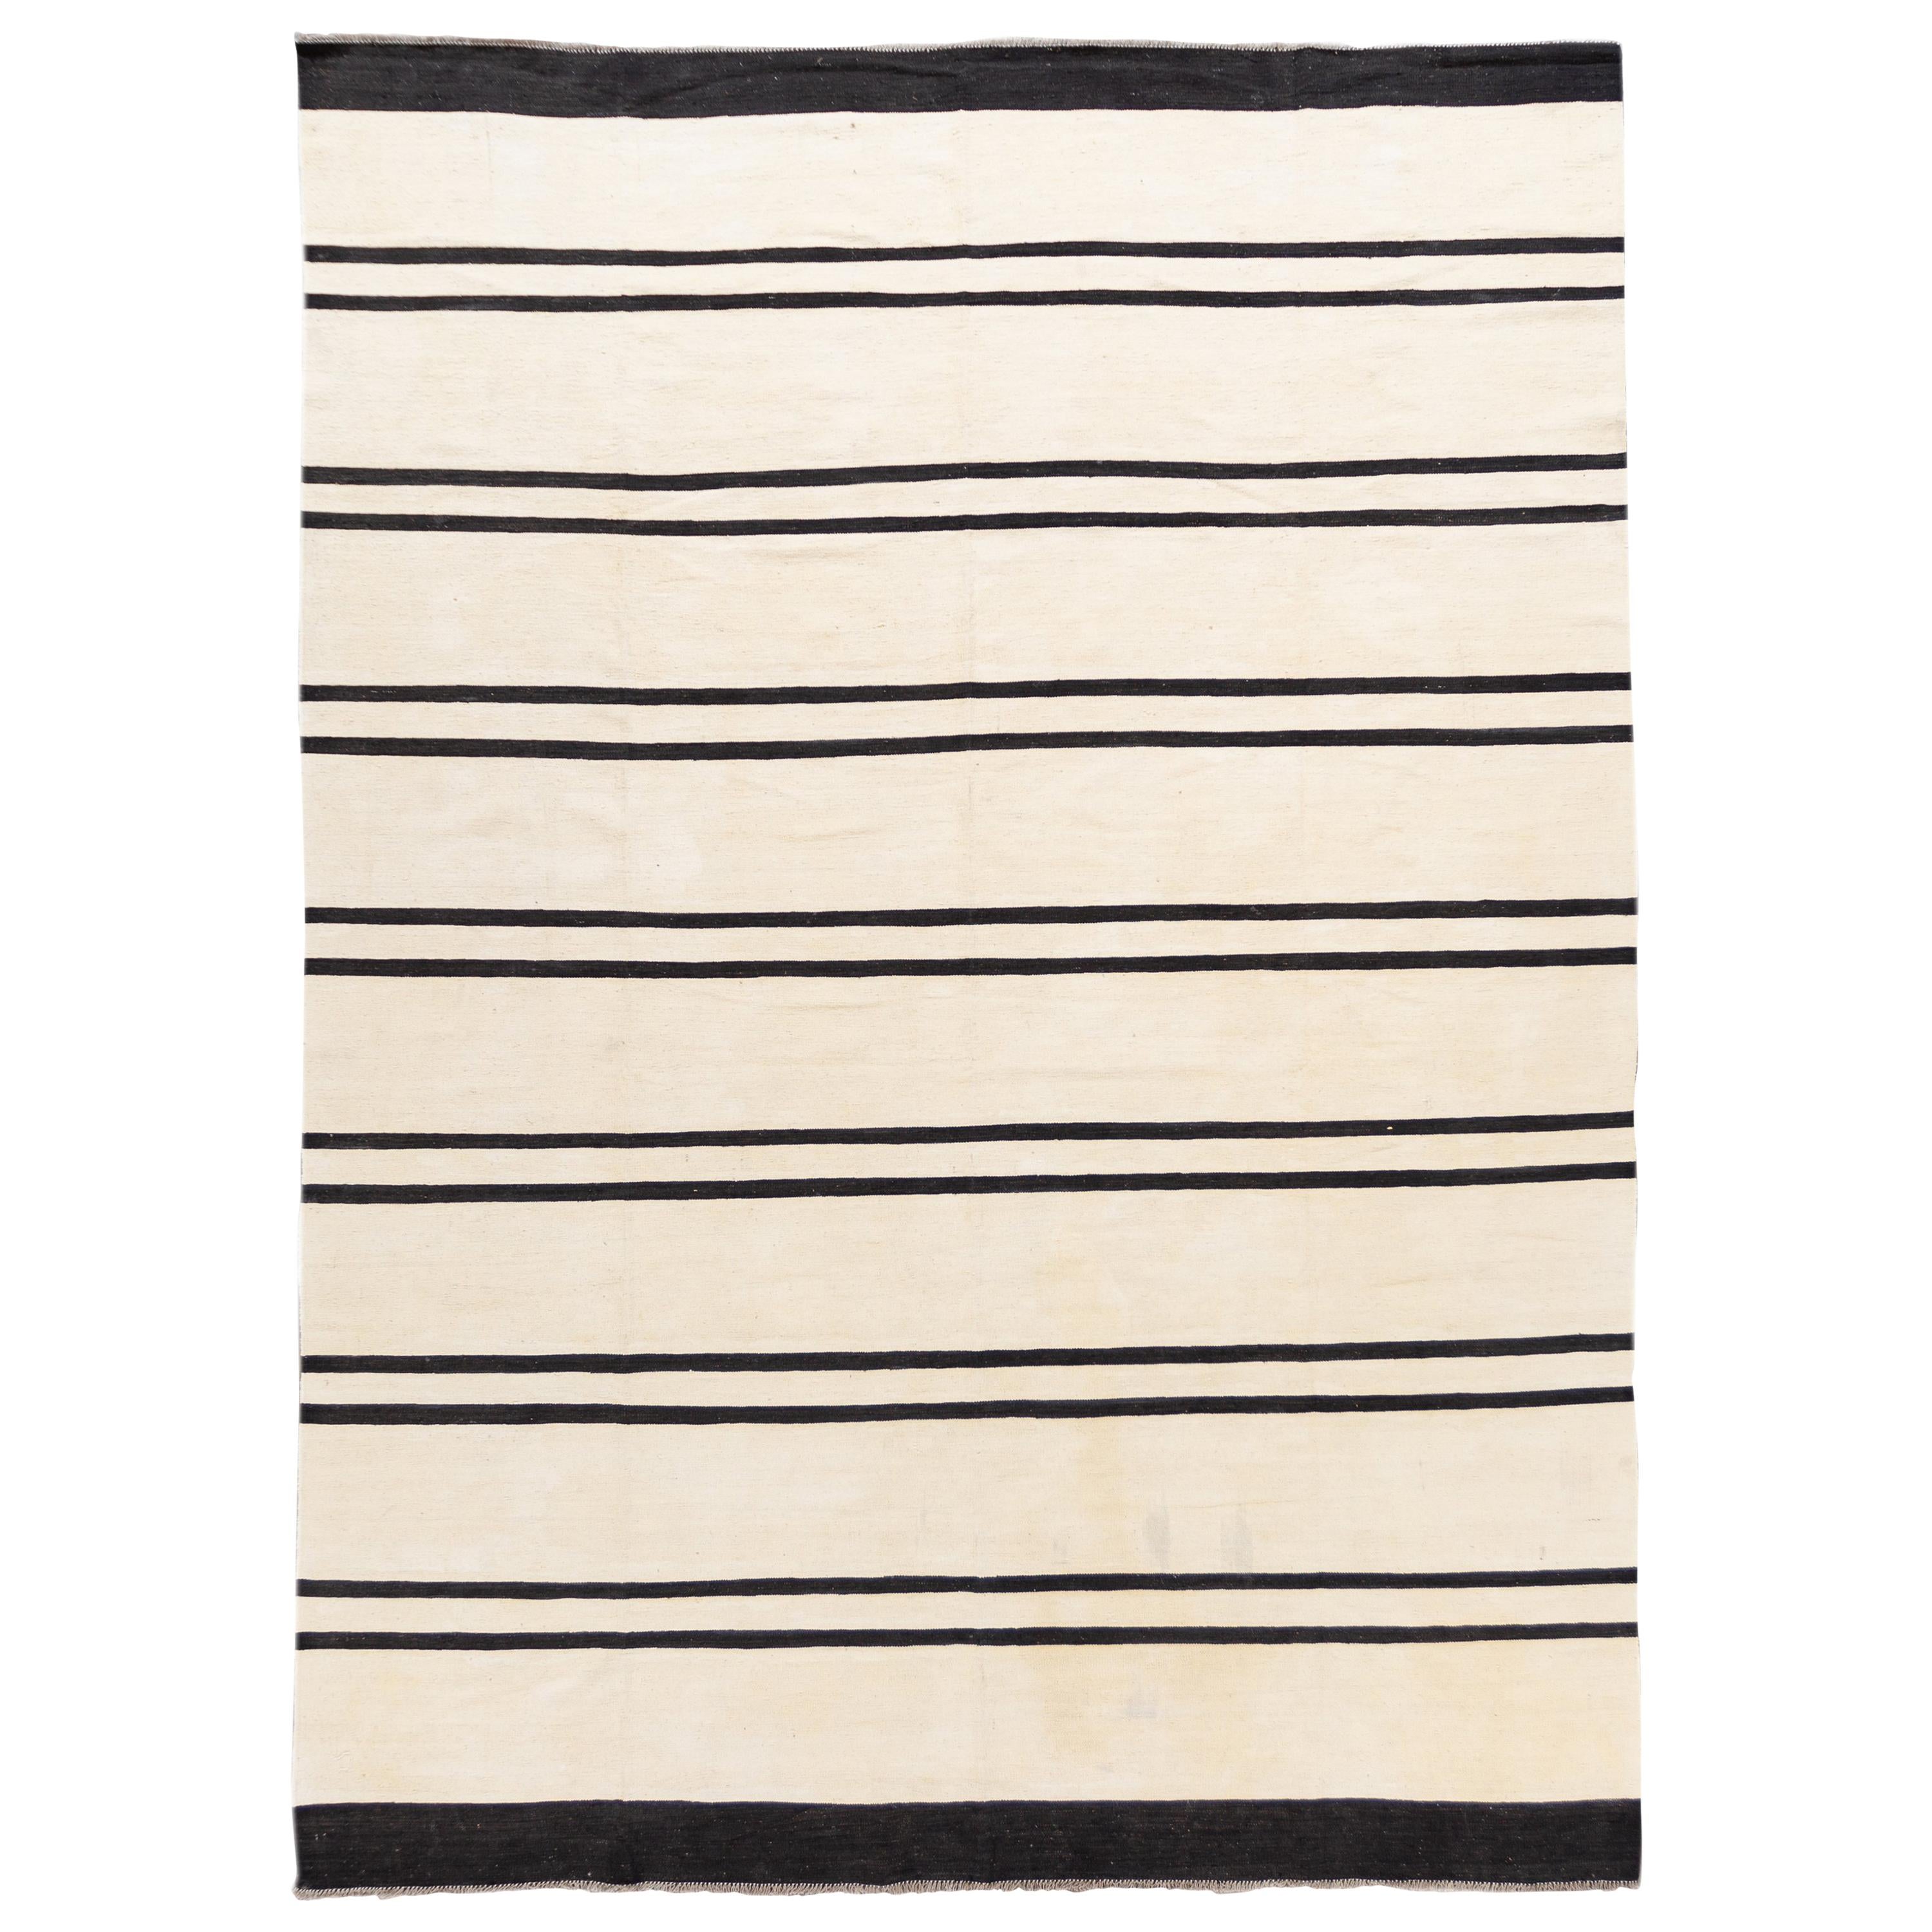 Contemporary Black & White Striped Kilim Flatweave Wool Rug For Sale